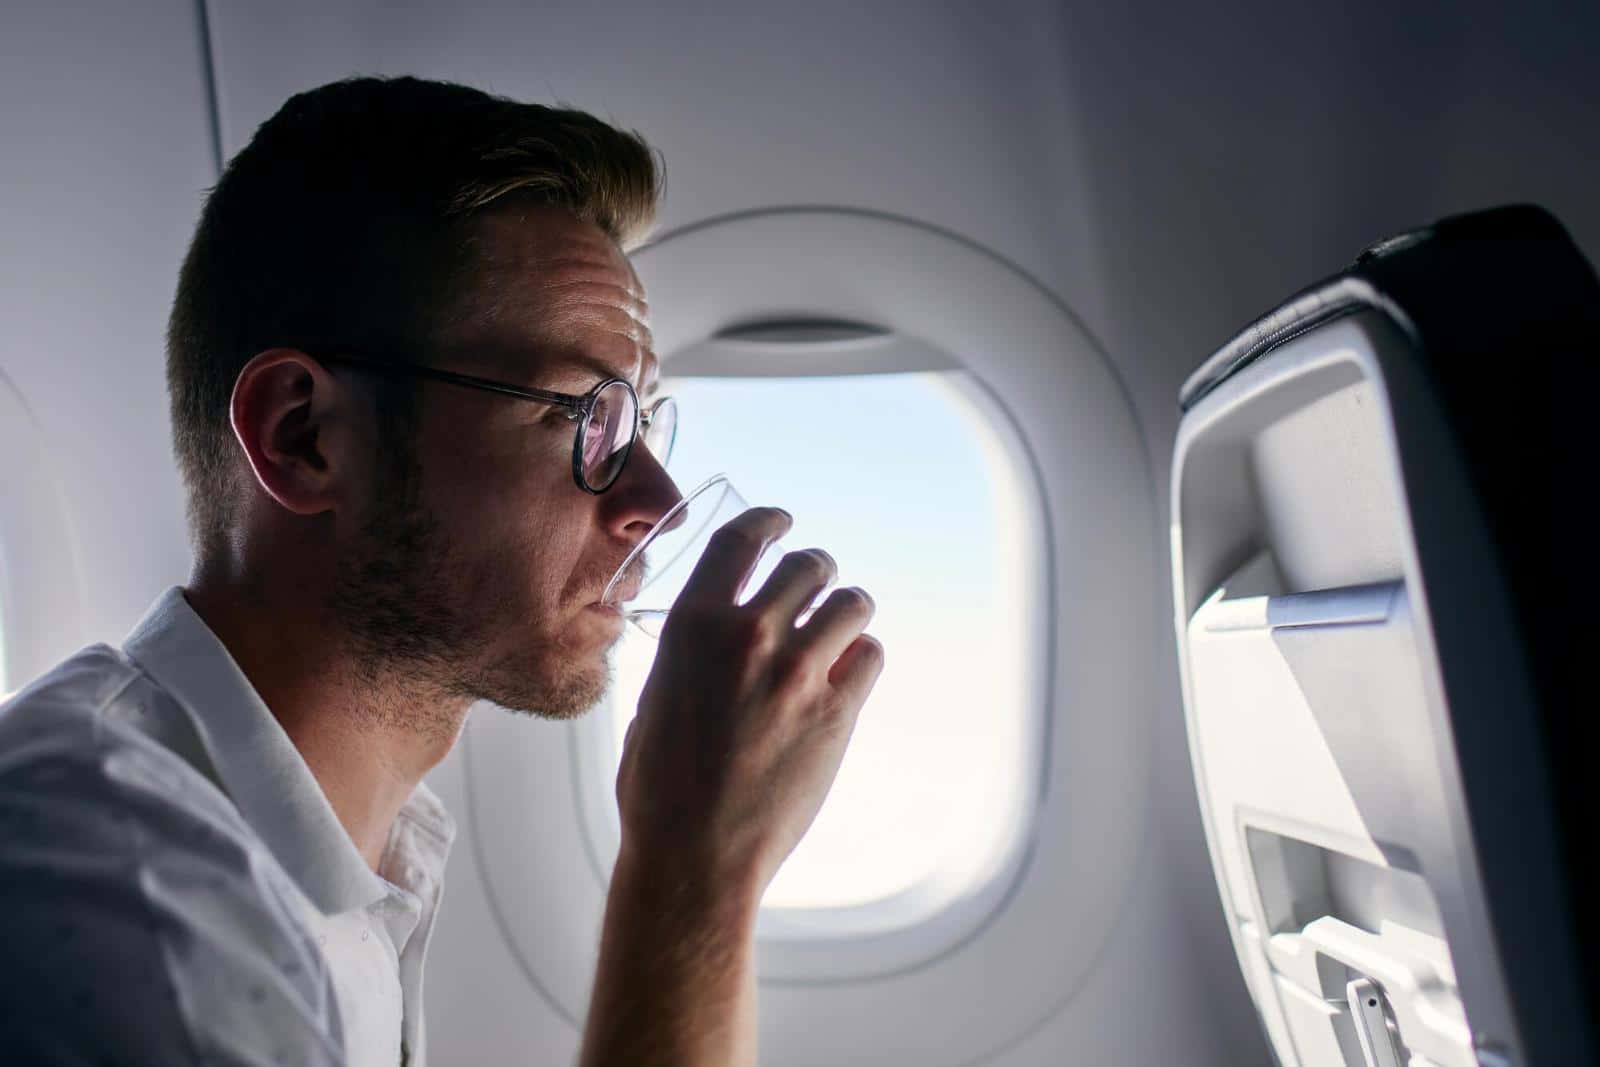 Man on plane drinking water - How to Stay Hydrated on a Plane